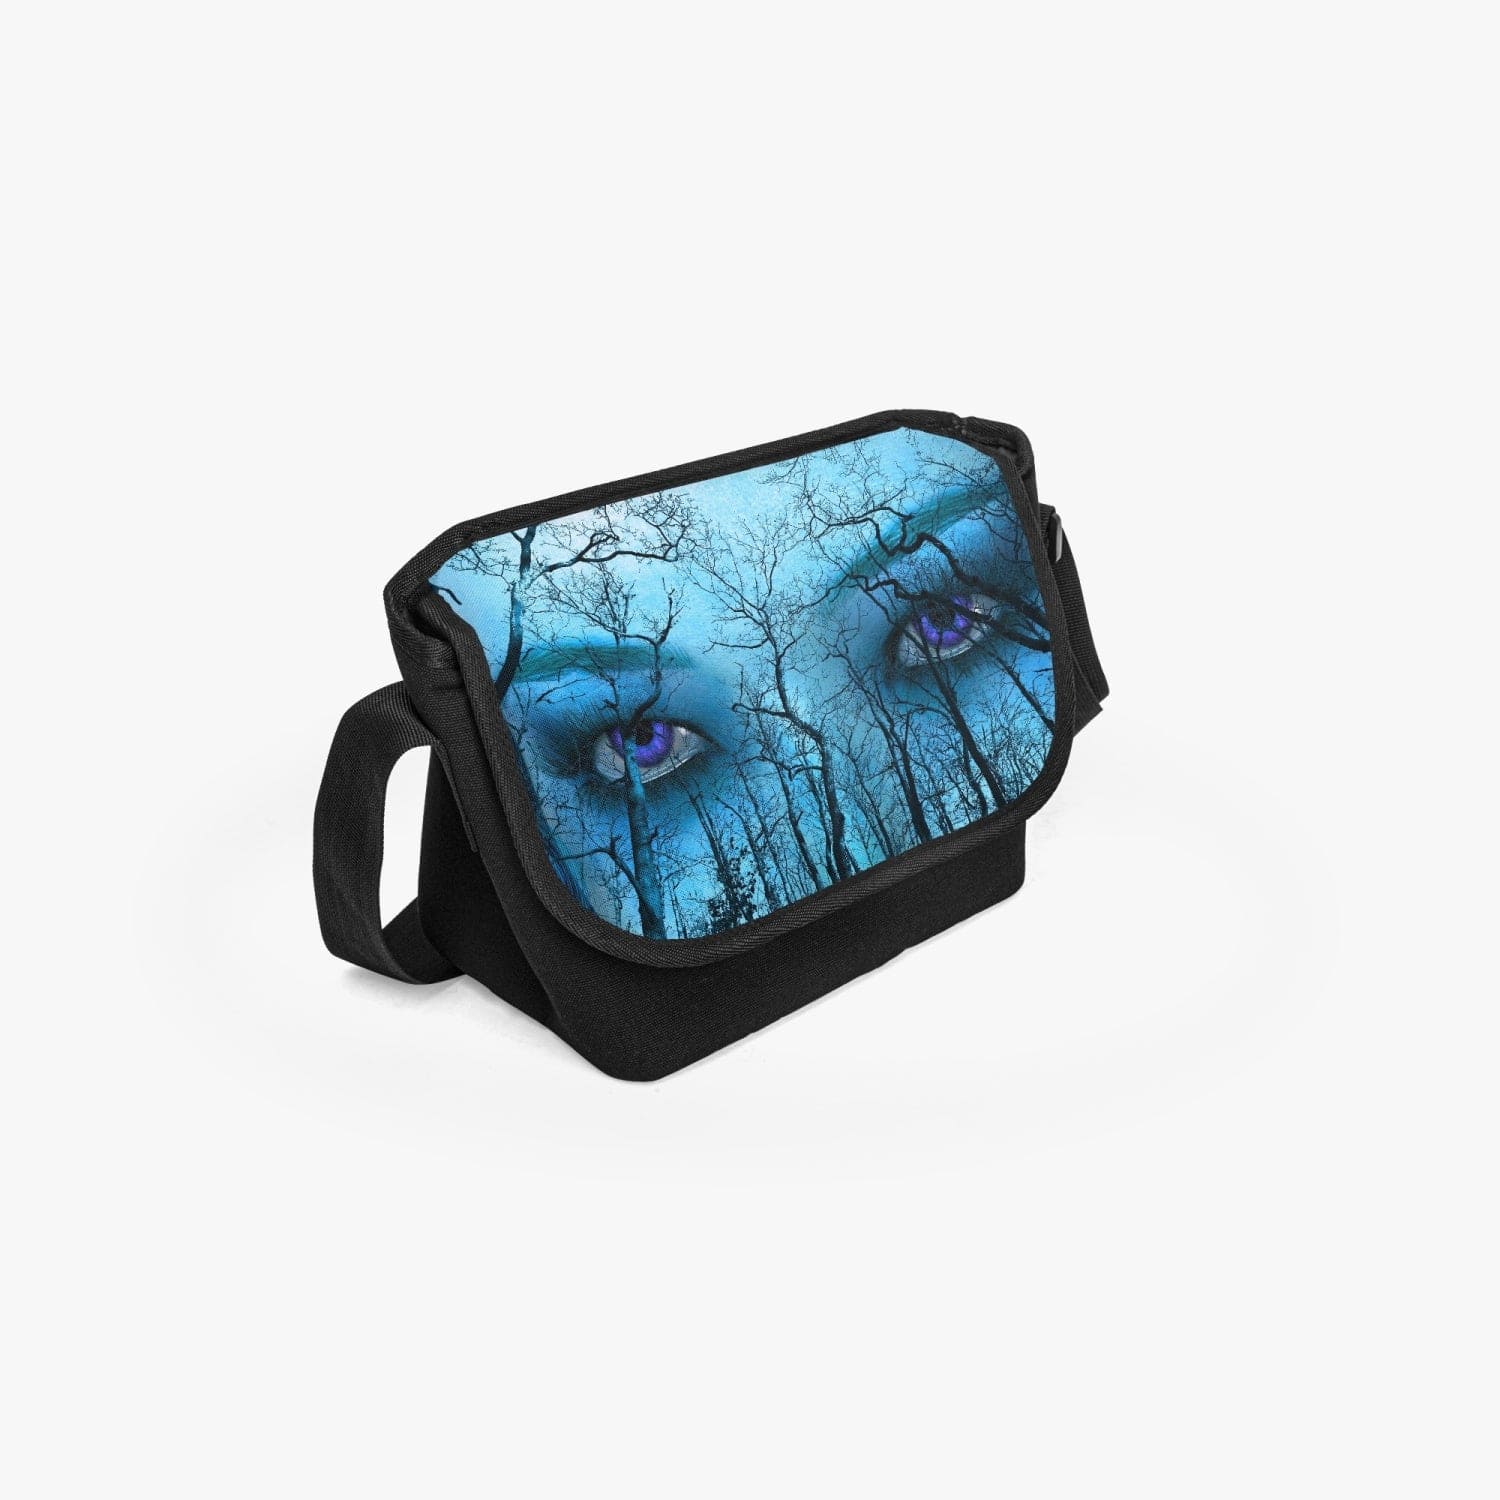 Piercing purple eyes feature on a forest themed print on this canvas messenger bag at Gallery Serpentine.  Blue and aqua tones give this a supernatural feel with a gothic naturecore theme.